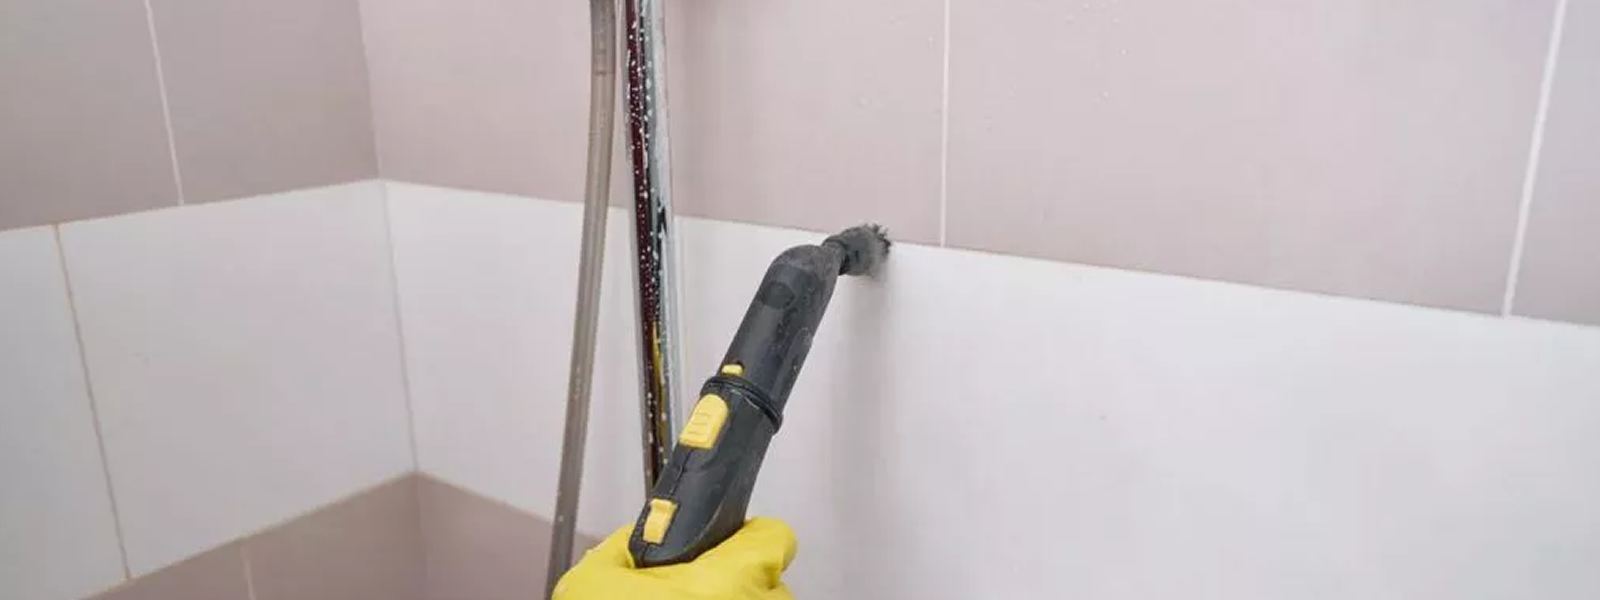 Grout Cleaning & Sealing - Affordable & Long Lasting - Perma Treat